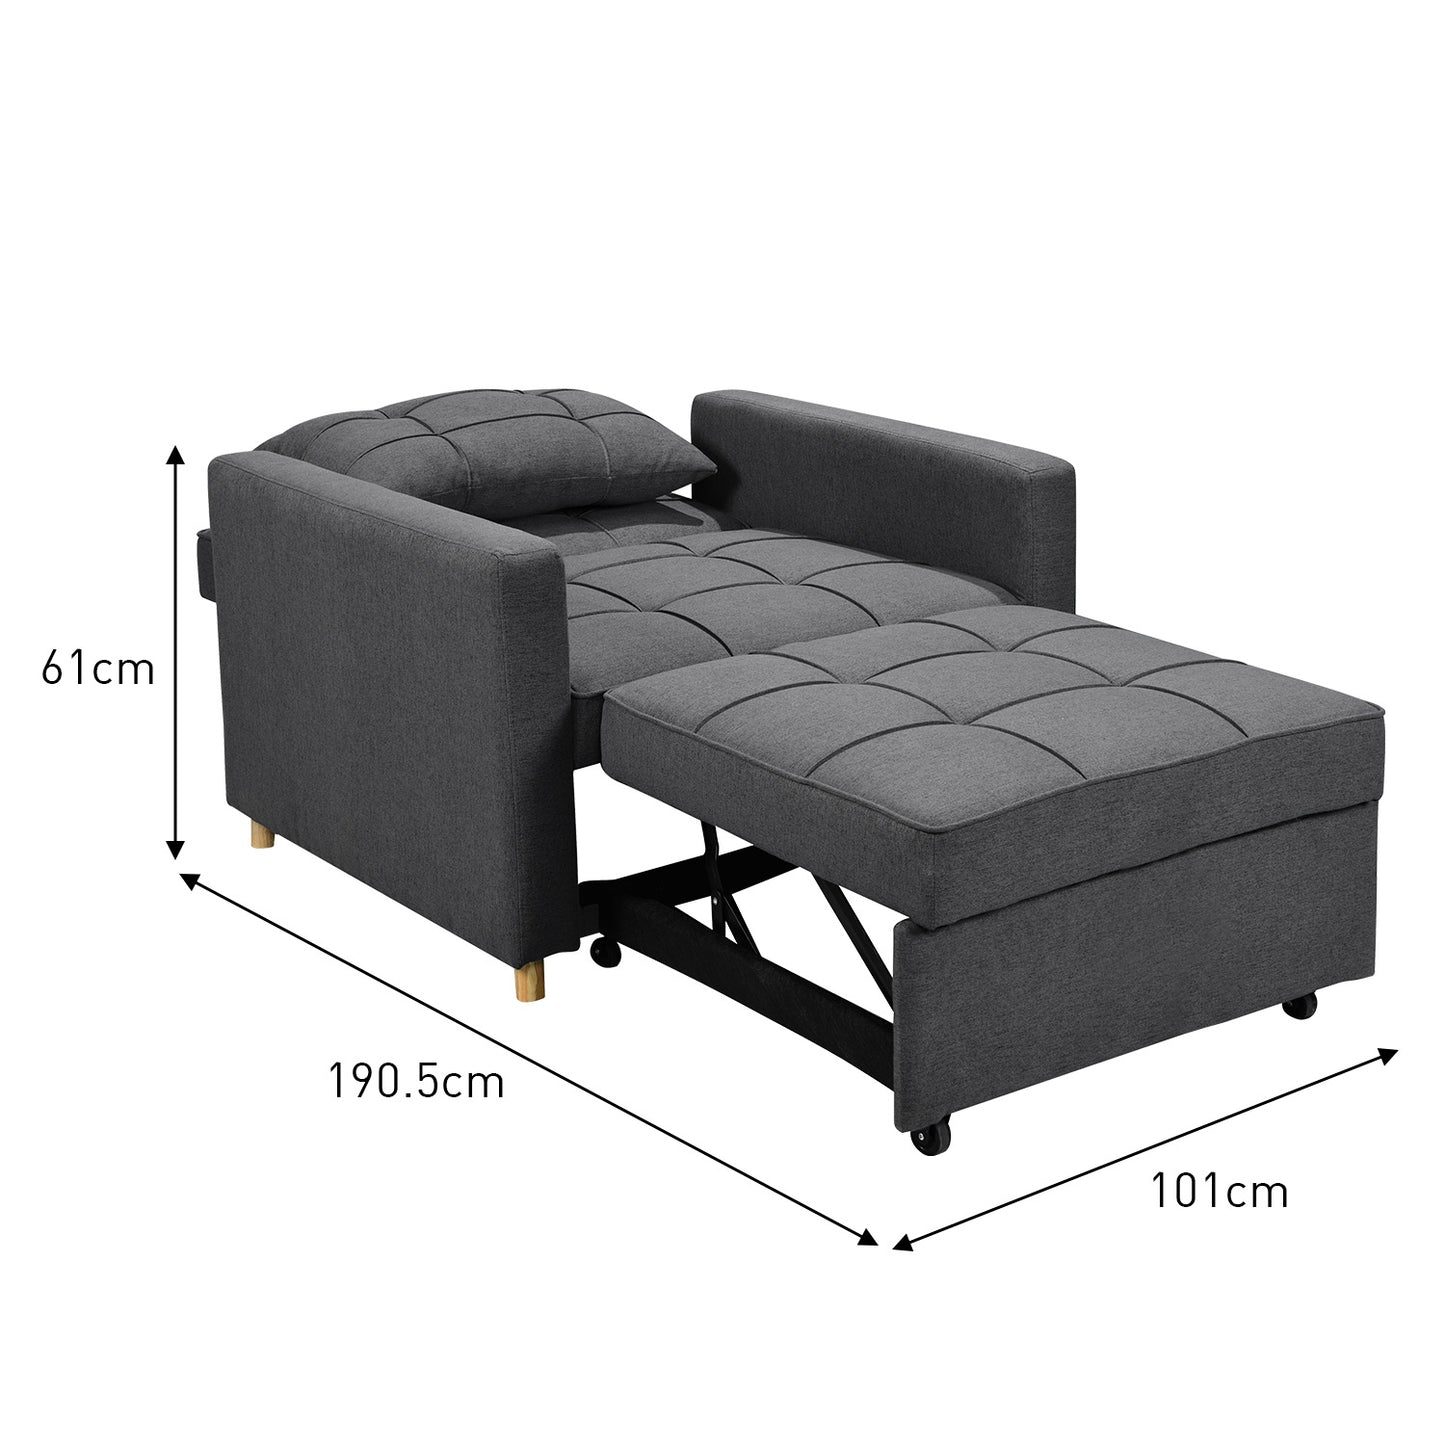 Mindy 3-in-1 Convertible Lounge Chair Bed - Dark Grey